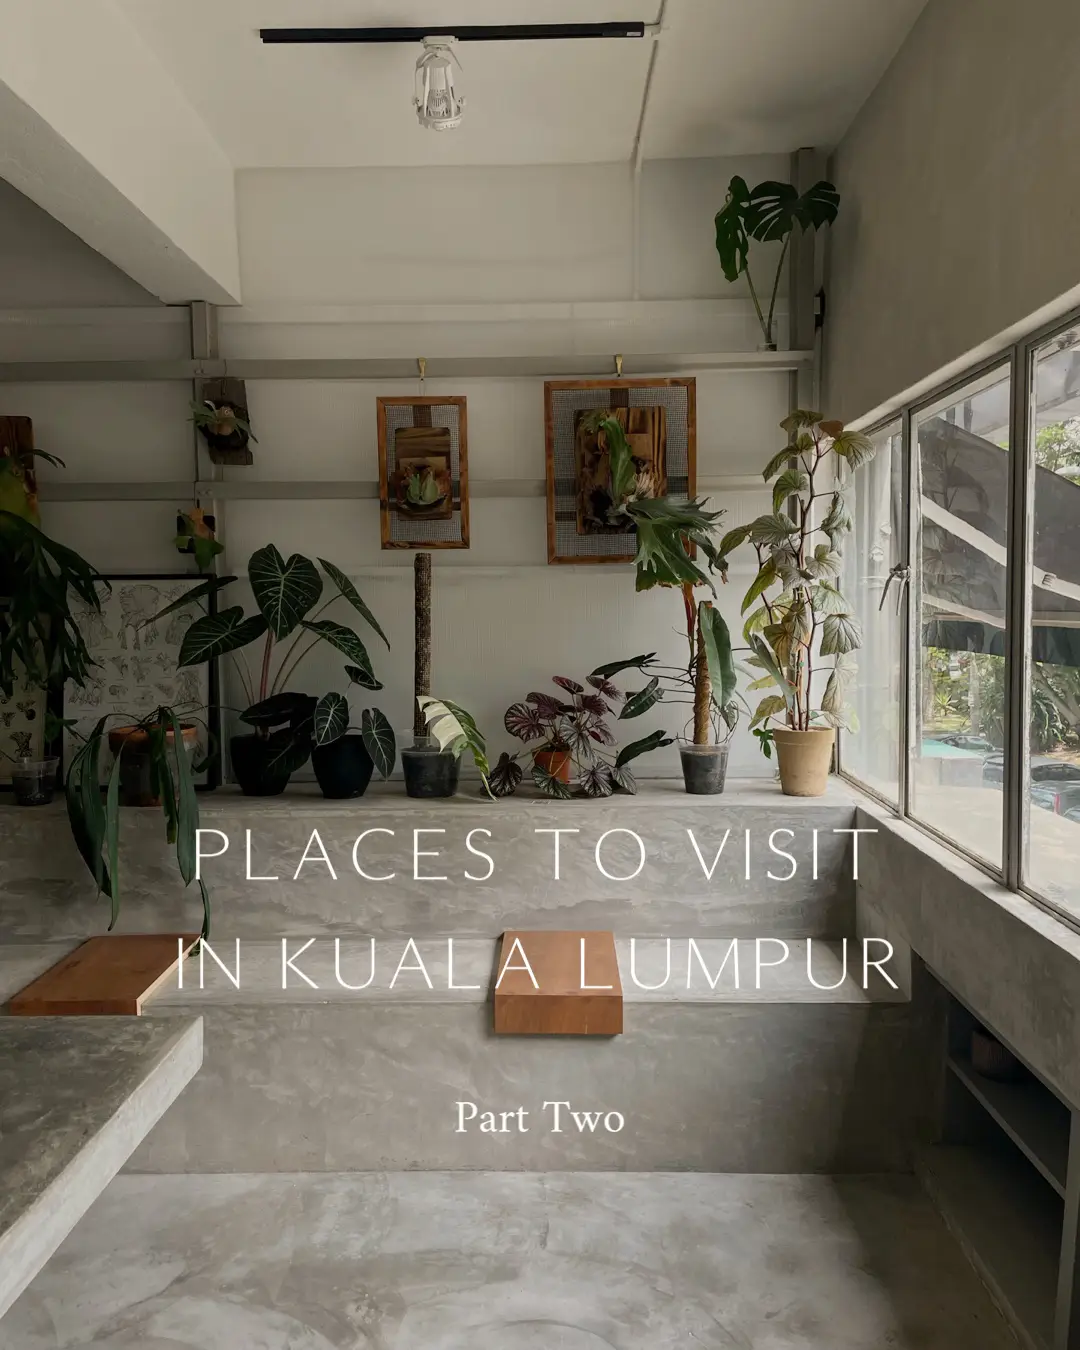 MORE PLACES TO GO IN KUALA LUMPUR's images(0)